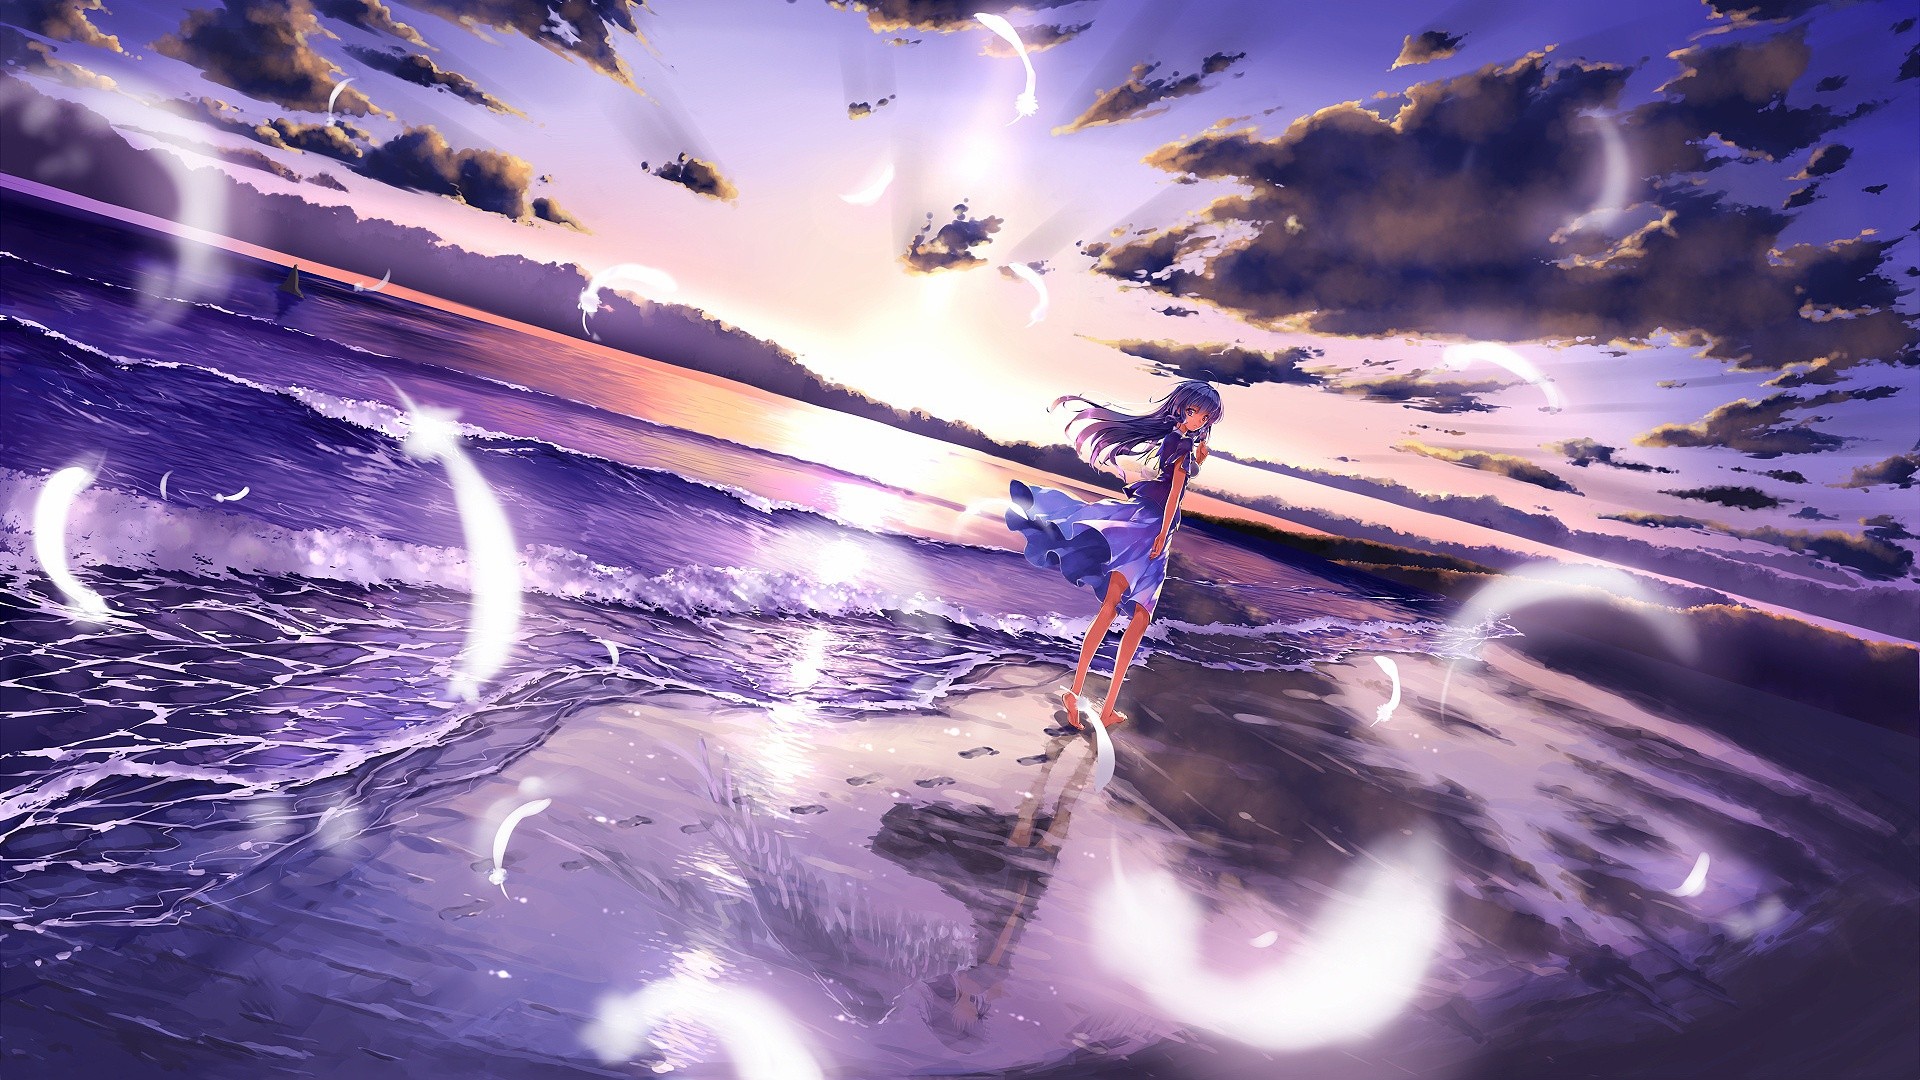 1920x1080 Anime wallpaper ·① Download free awesome full HD ...